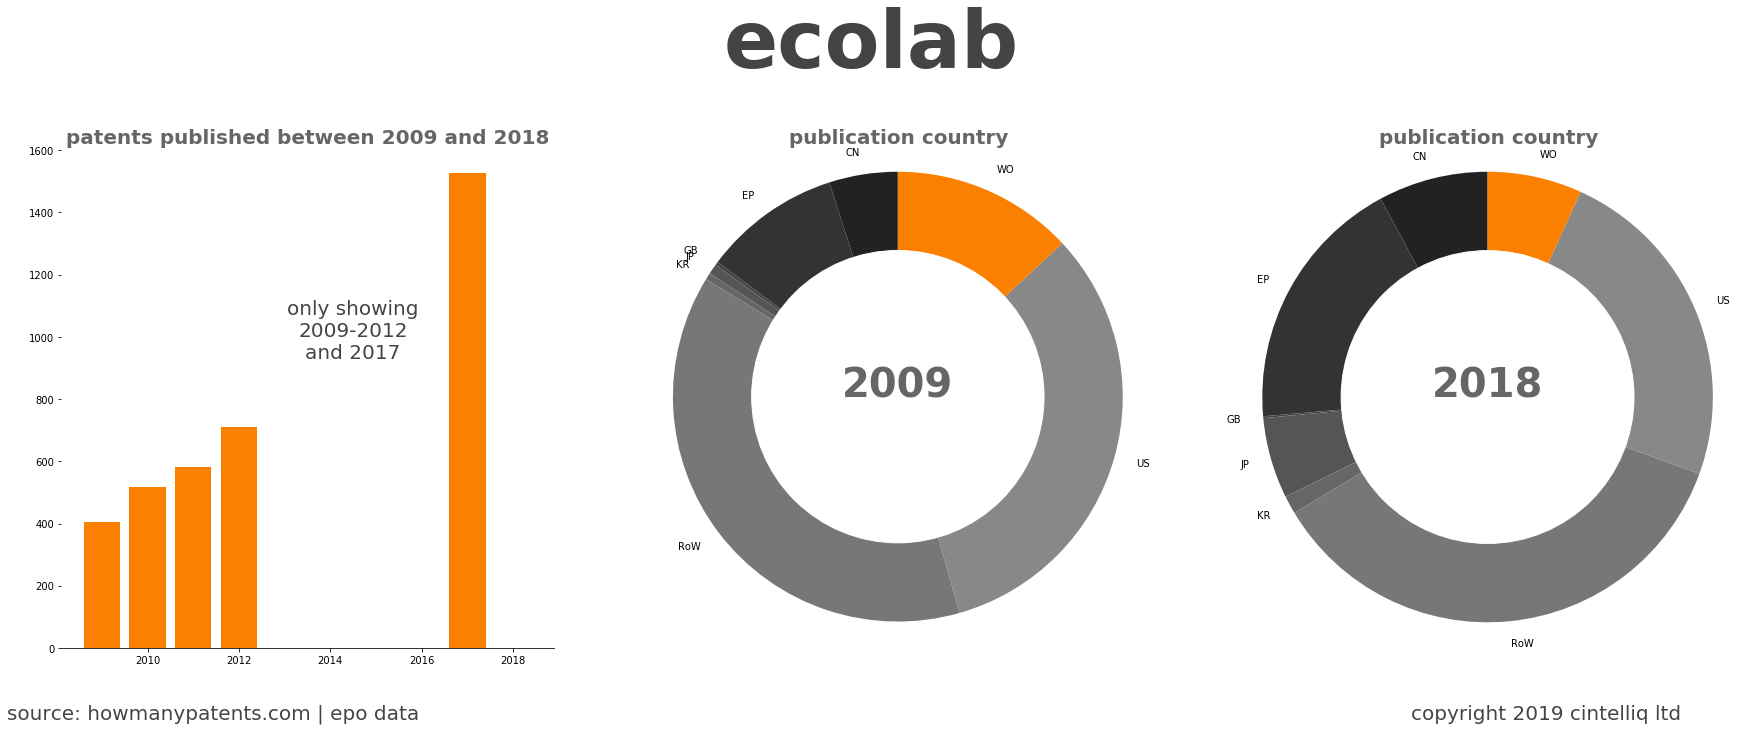 summary of patents for Ecolab